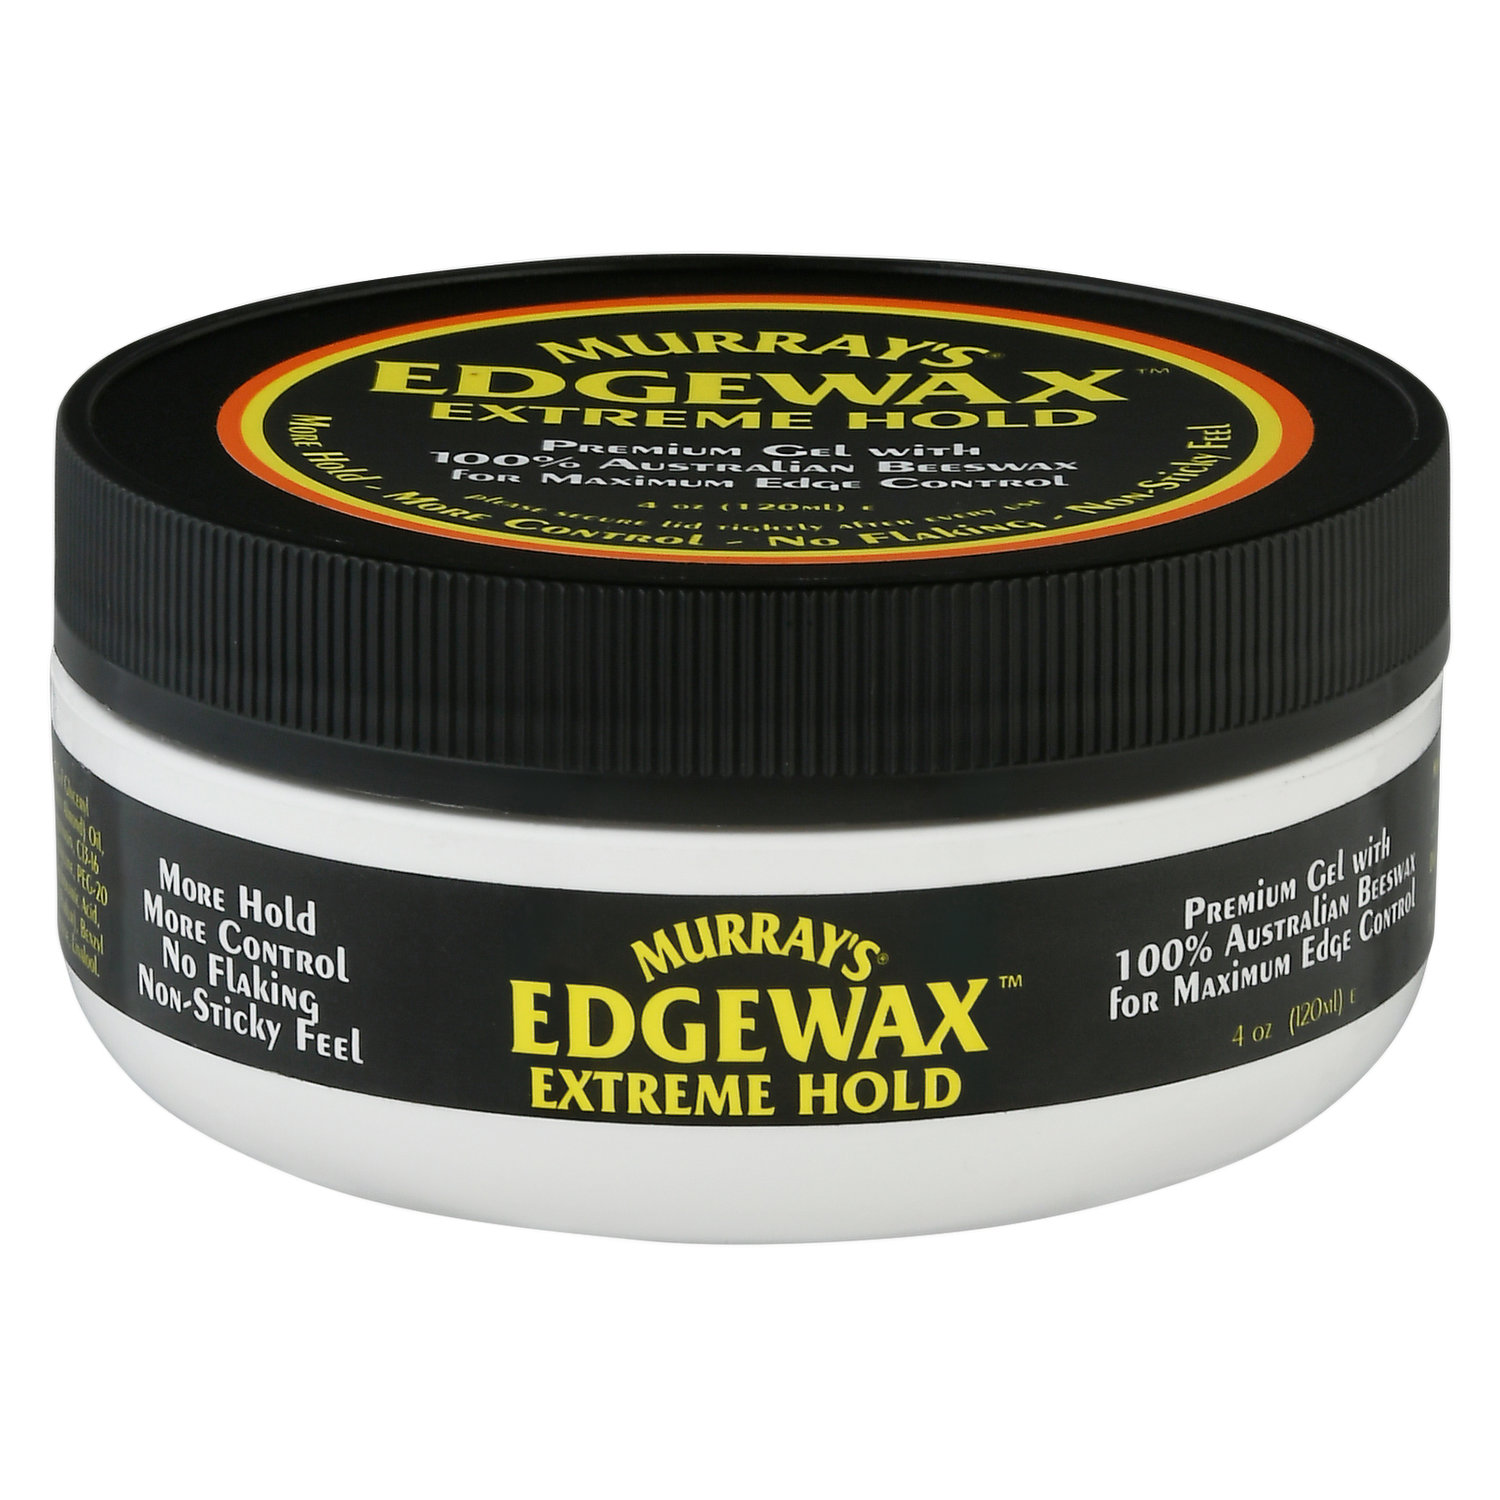  Murray's Beeswax, Black, 4 Ounce : Everything Else